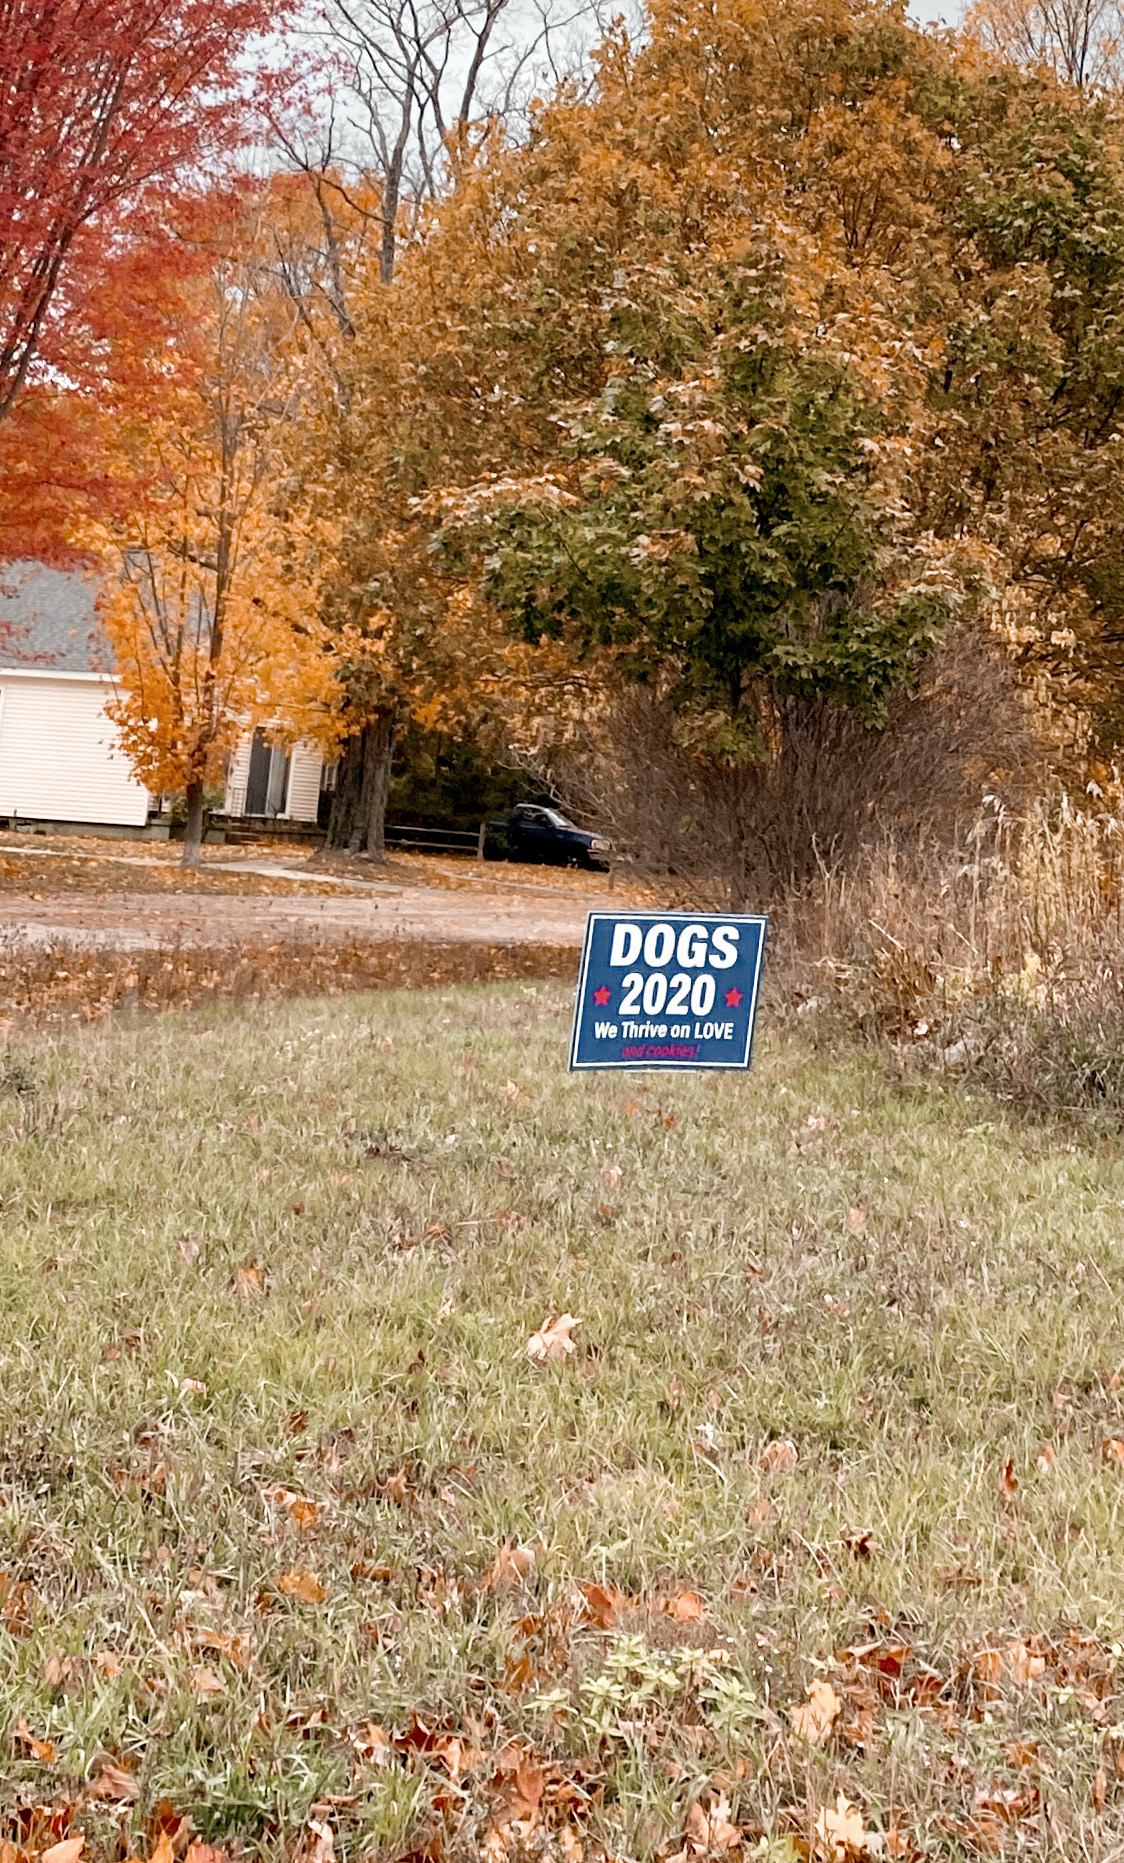 Homemade Political Signs from Northern Michigan | biblio-style.com